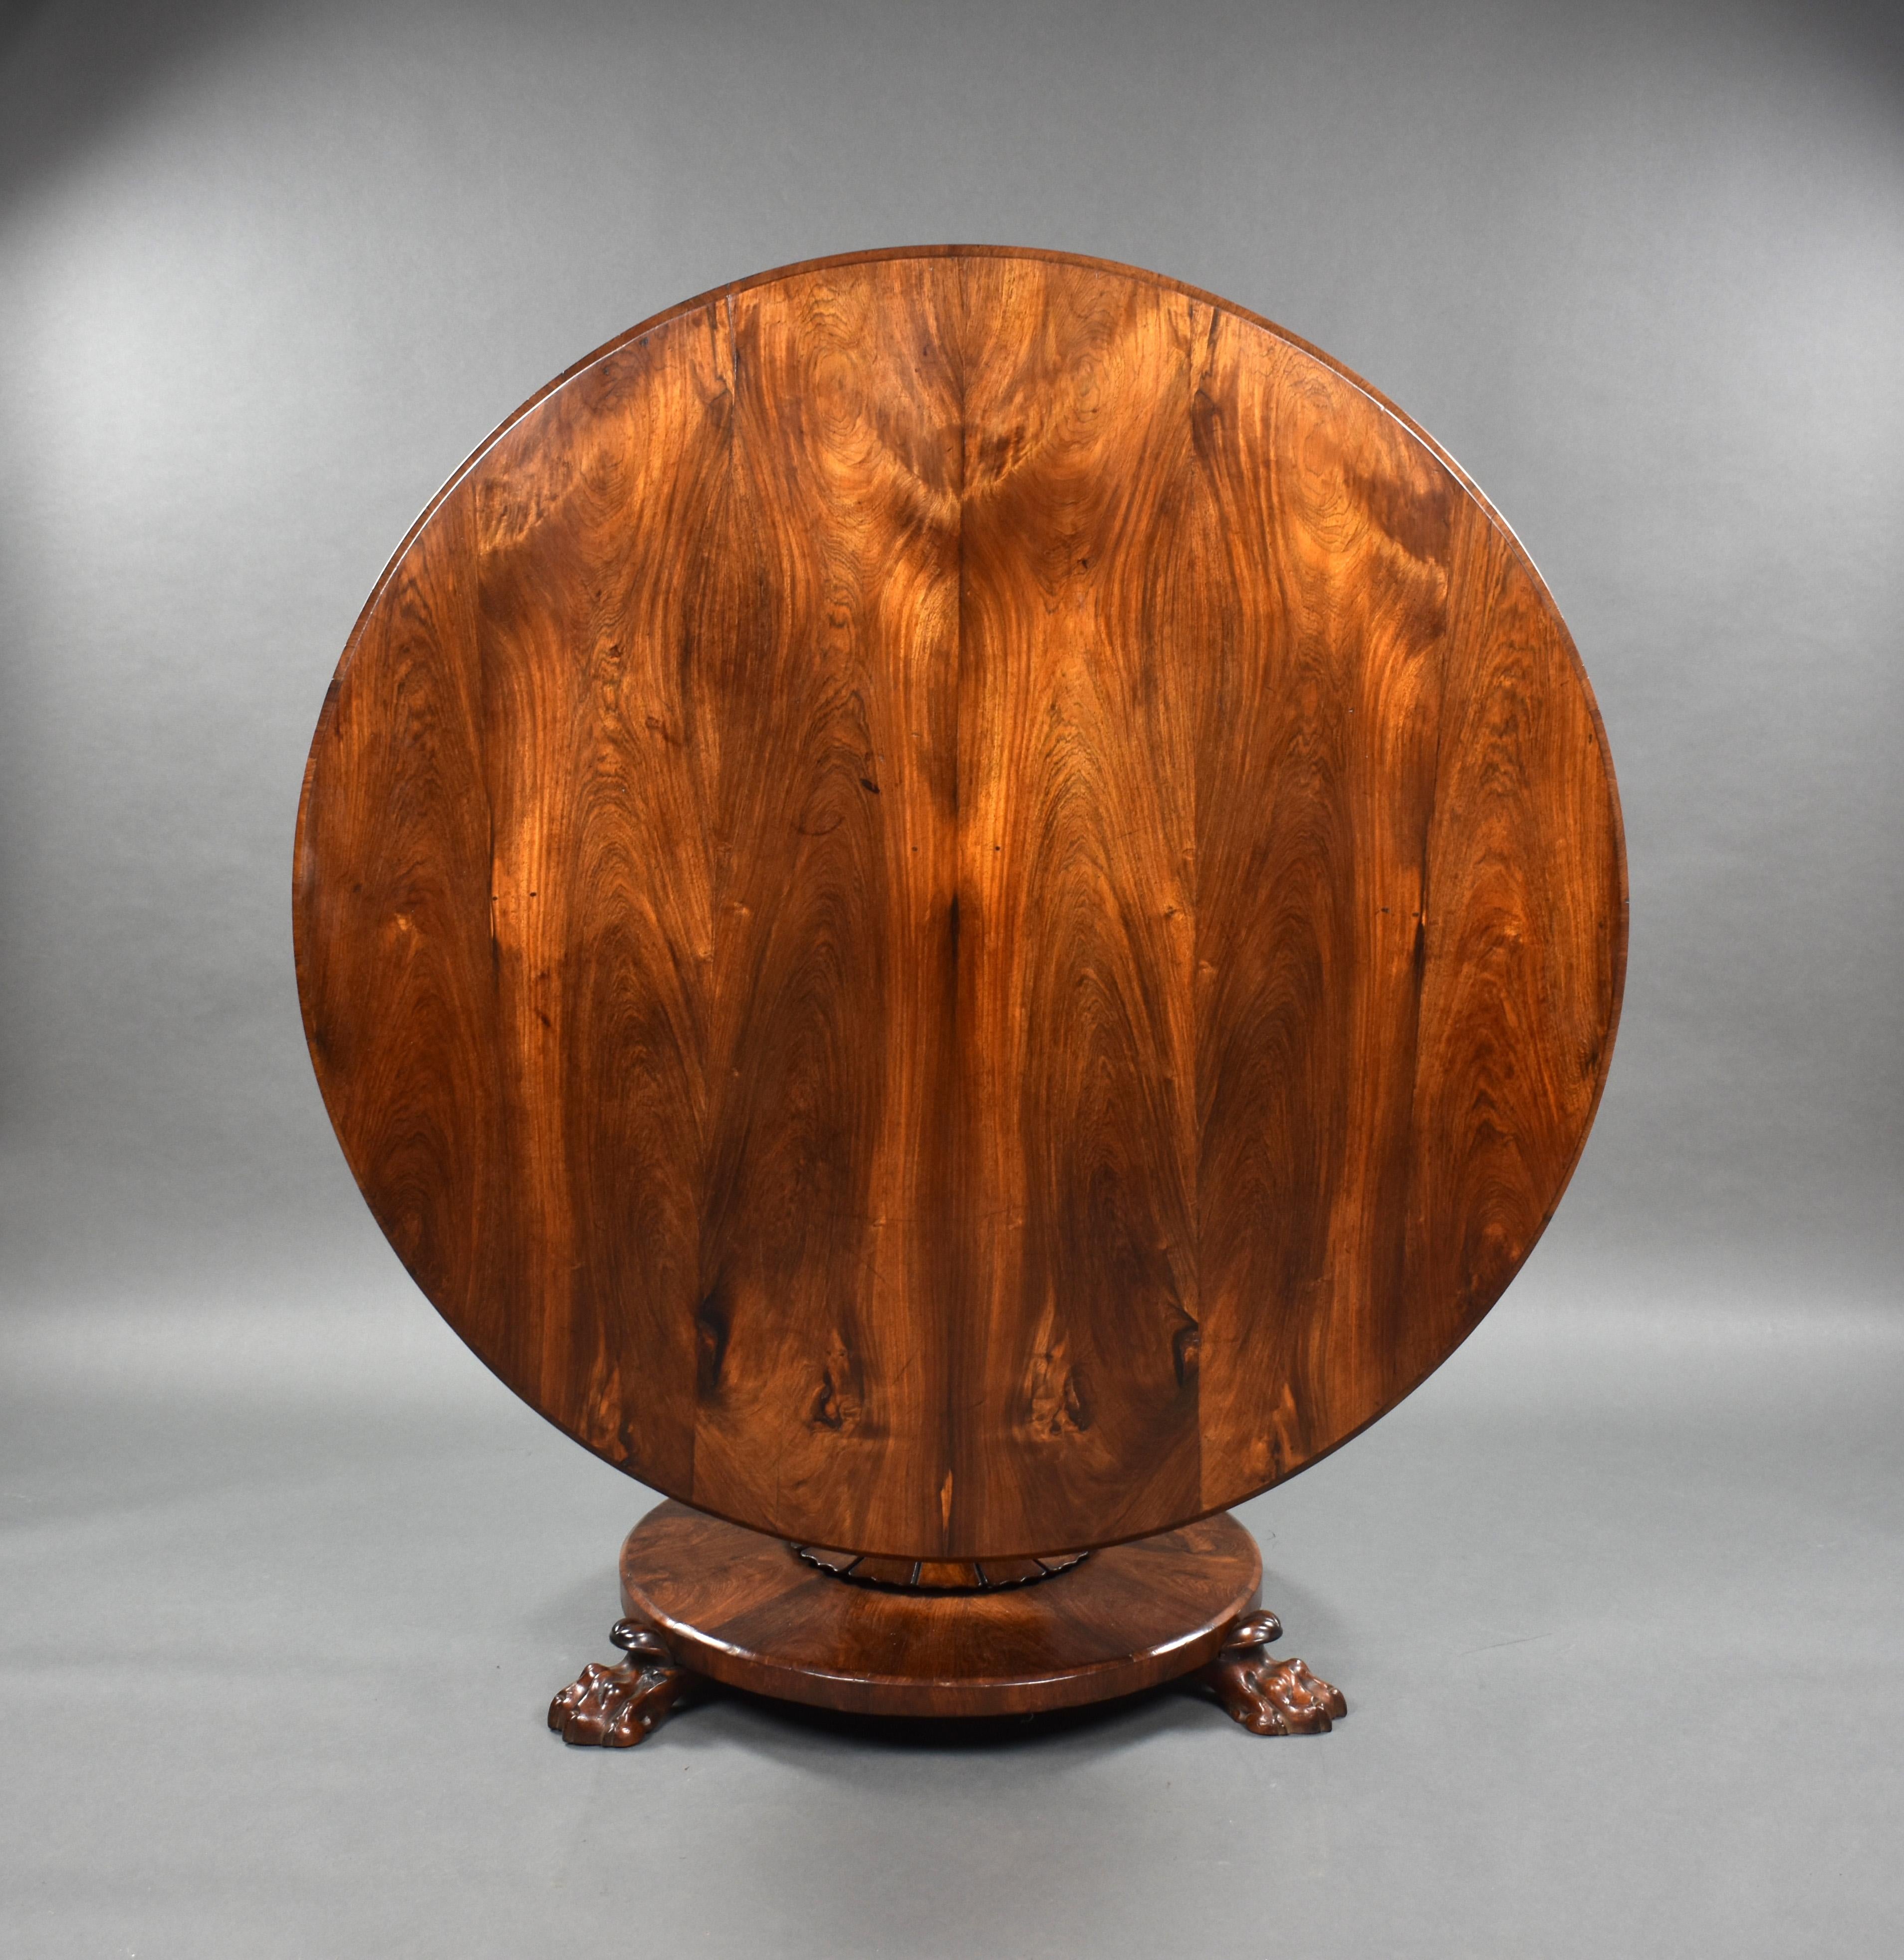 For sale is a good quality William IV rosewood circular breakfast table, having a well figured top above a turned stem, over a platform base raised on carved lions paw feet. The table is in very good condition for its age.

Measures: Width: 130cm